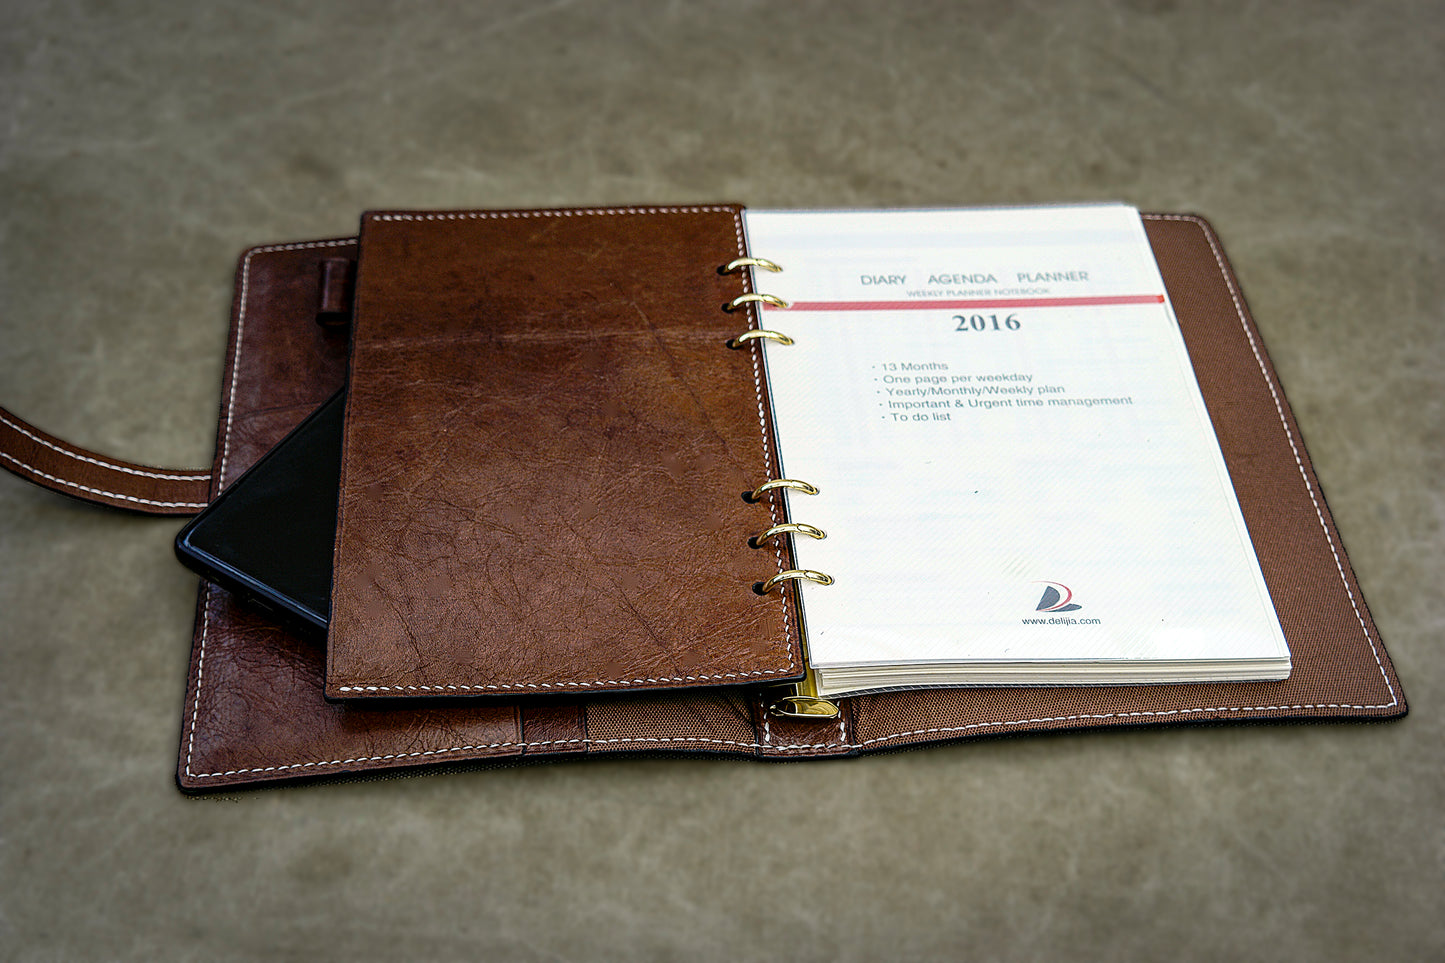 [Bag Pattren] Leather hand account book,Leather gift